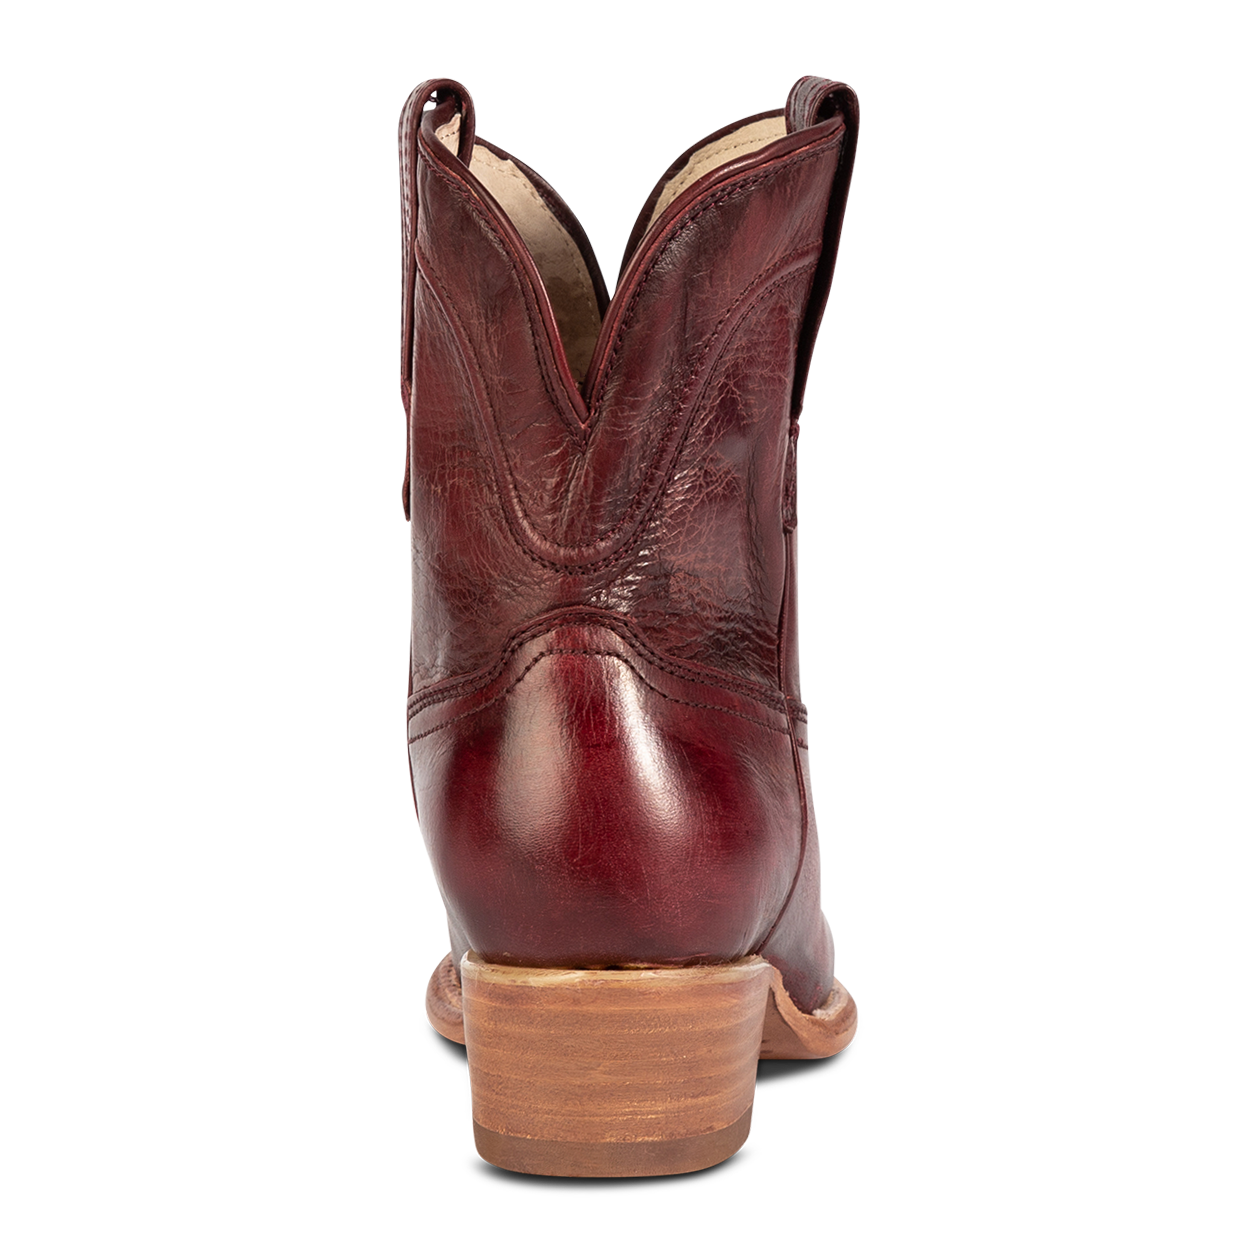 Back view showing back dip and leather heel with scallop stitch detailing on FREEBIRD women's Zamora wine leather bootie